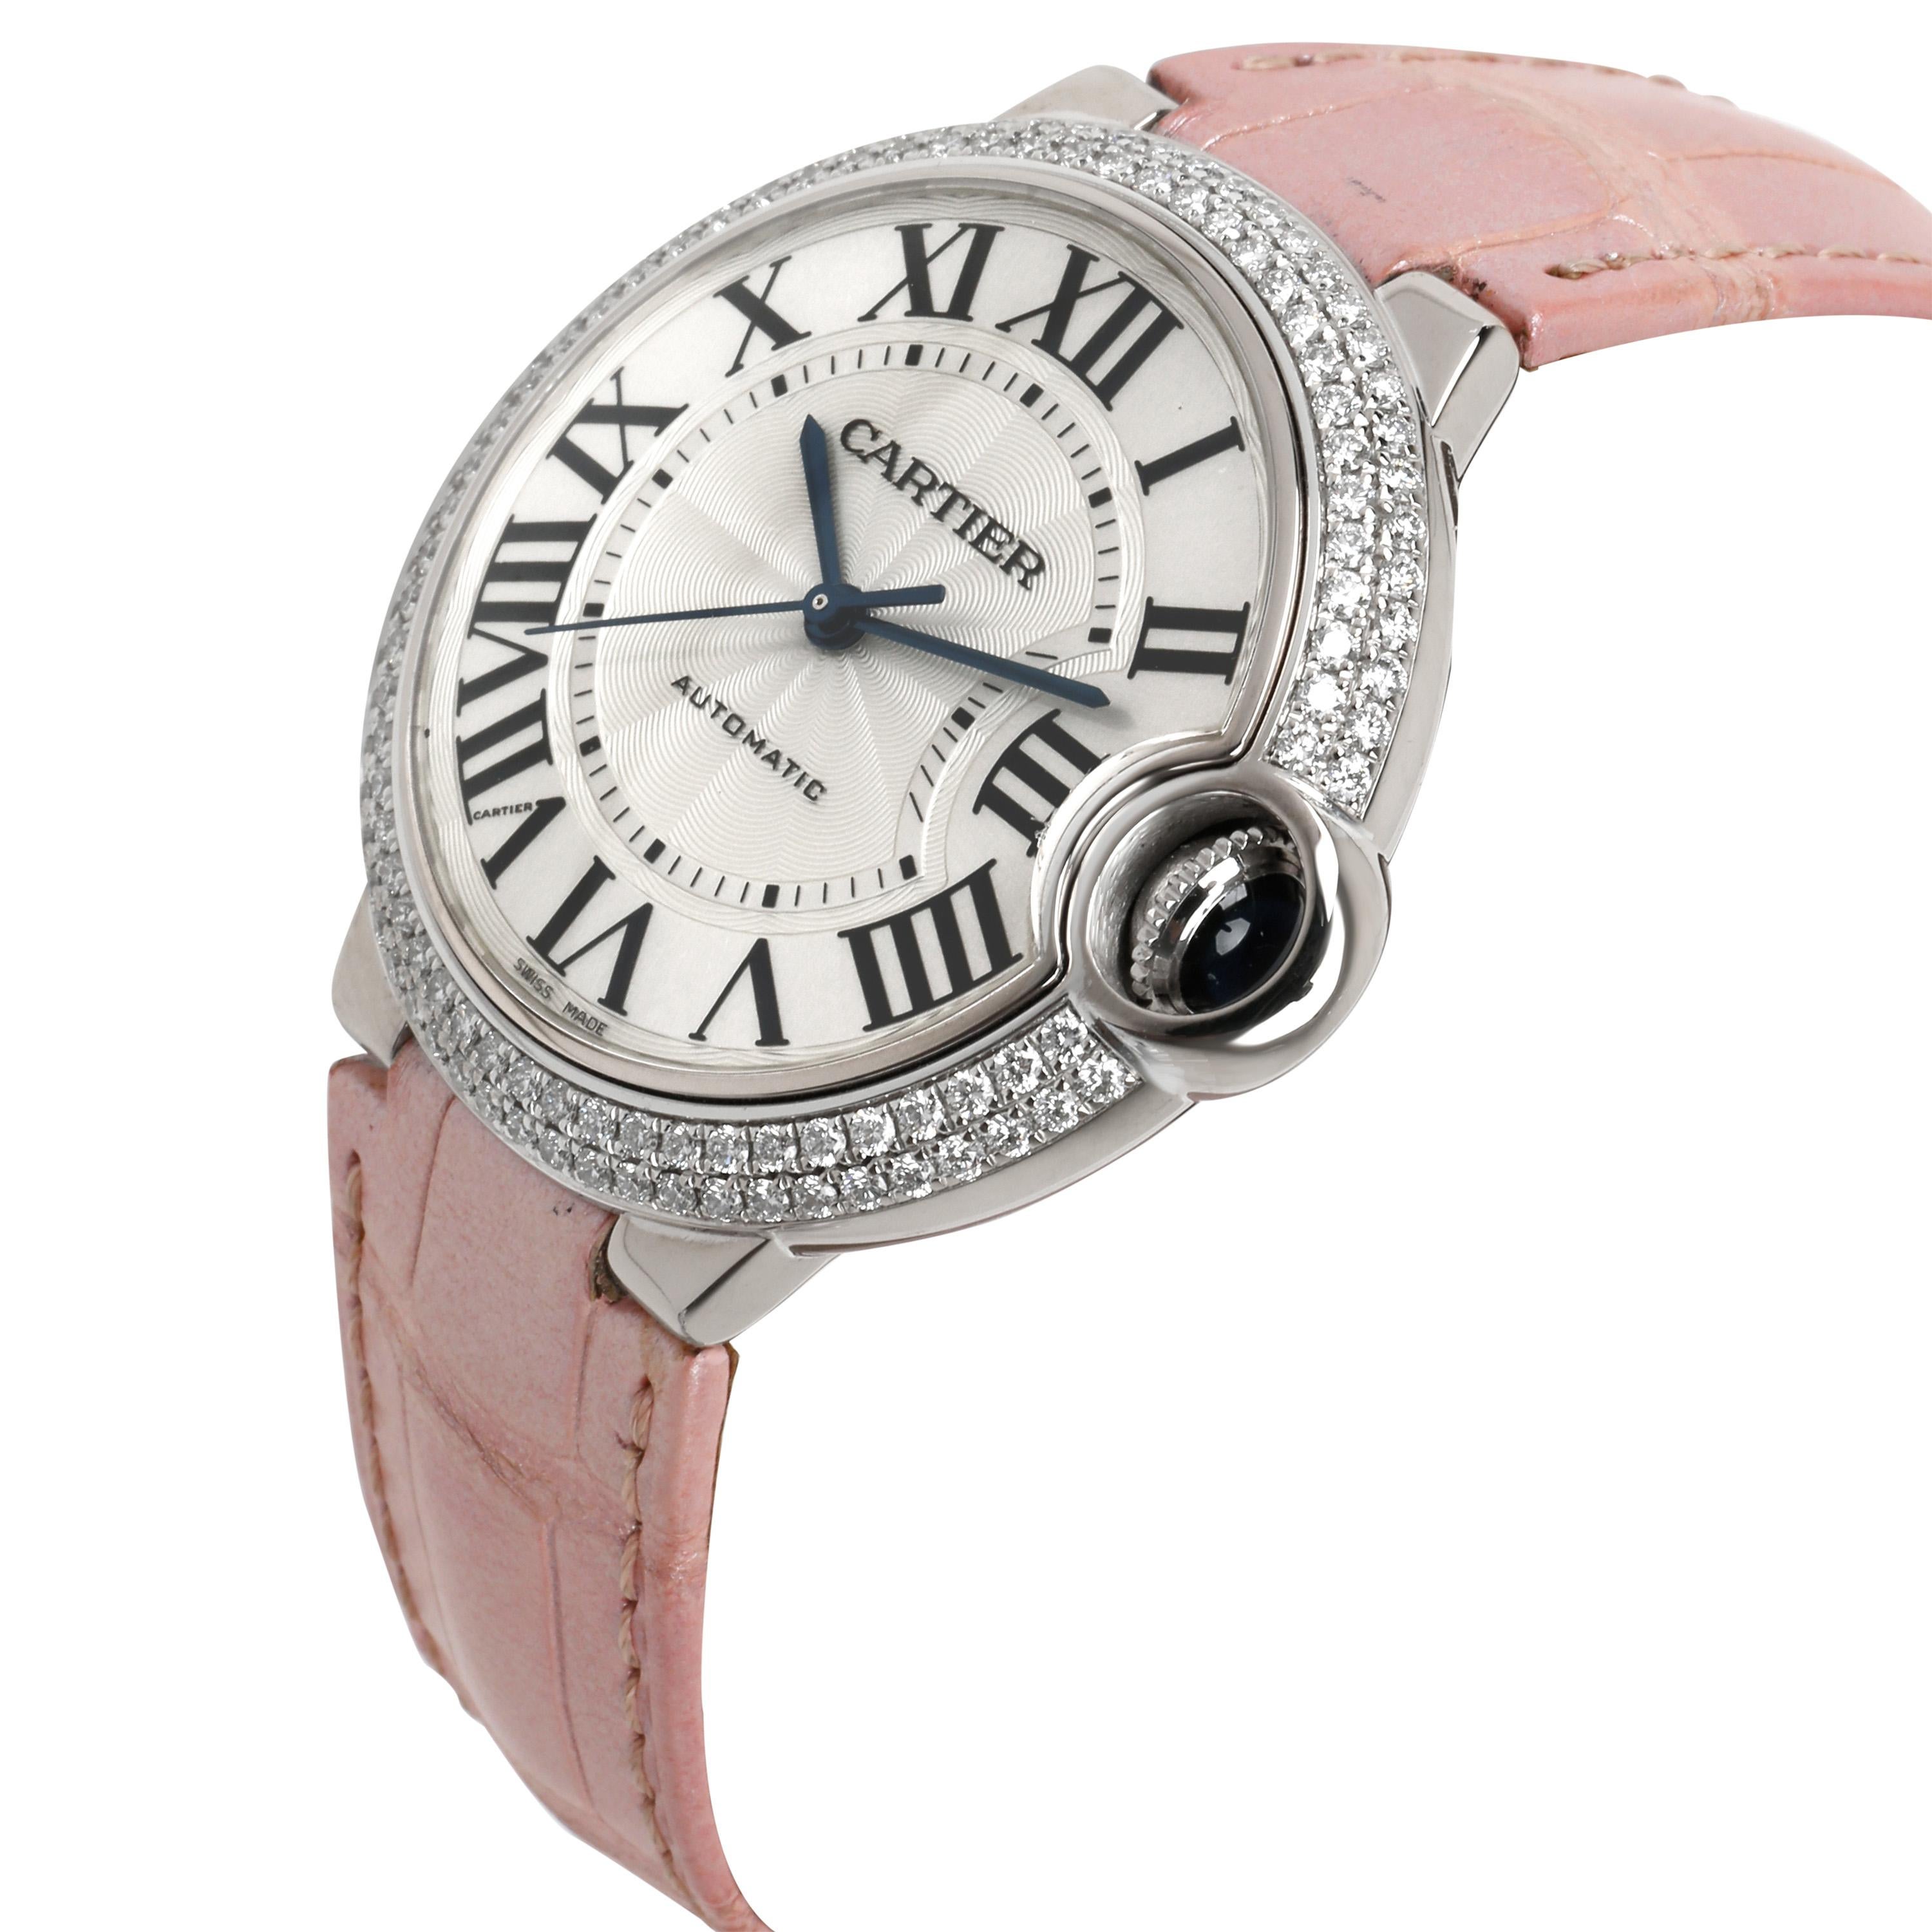 

Cartier Ballon Bleu WE900651 Unisex Watch in 18kt White Gold

SKU: 098834

PRIMARY DETAILS
Brand:  Cartier
Model: Ballon Bleu
Serial Number: ***
Country of Origin: Switzerland
Movement Type: Mechanical: Automatic/Kinetic
Refurbished Notes: